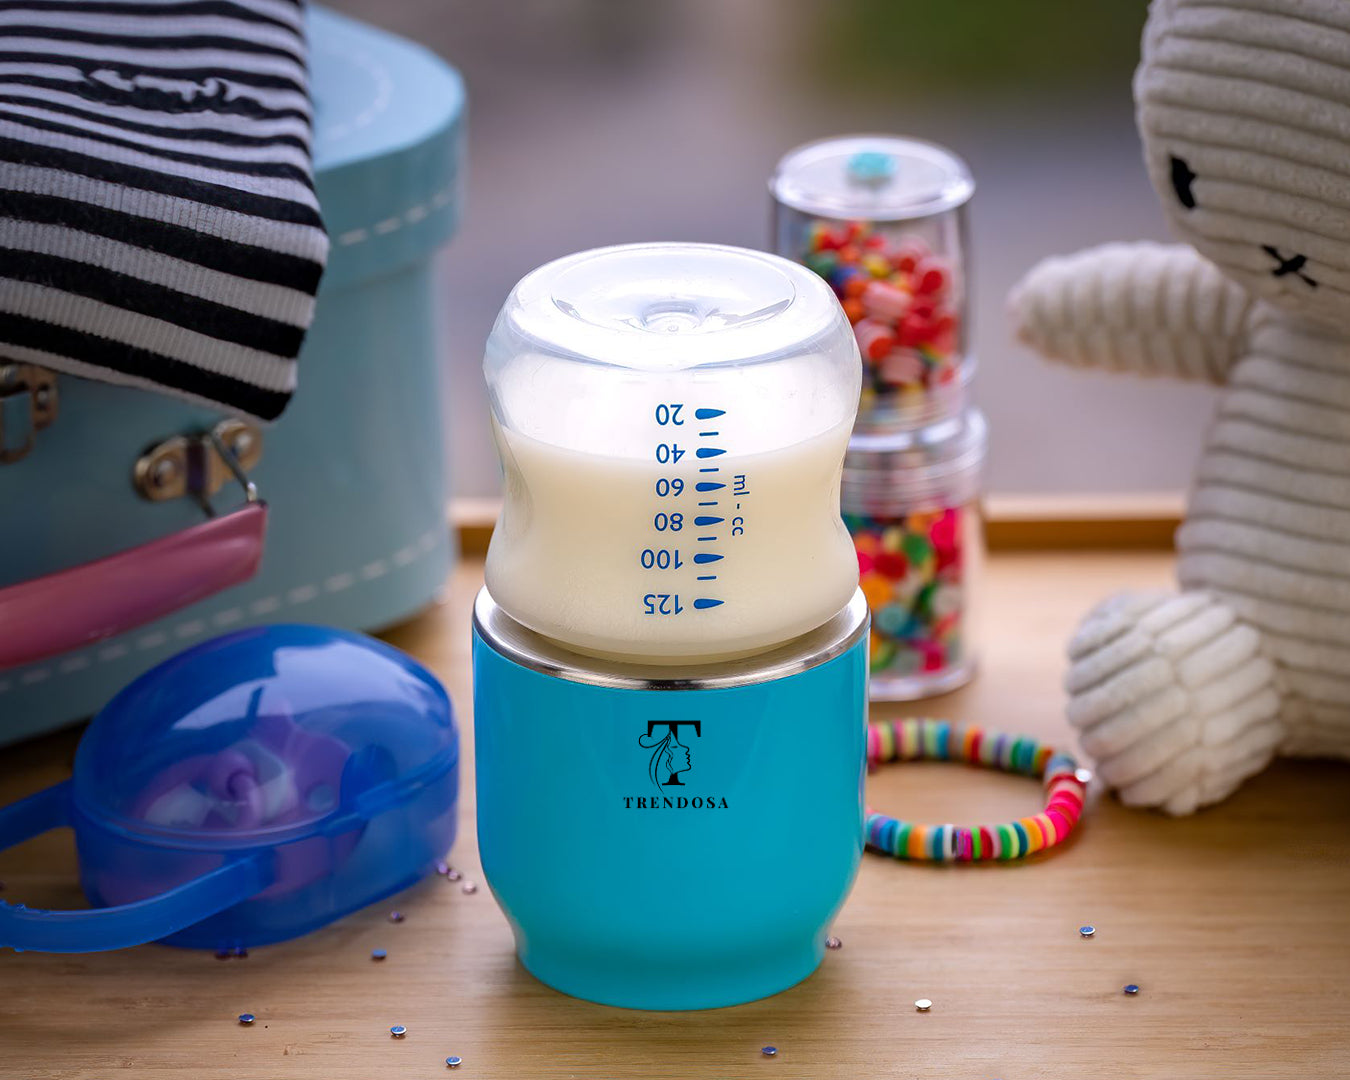 Trendosa Bottle Warmer with free pacifier case - Trendosa